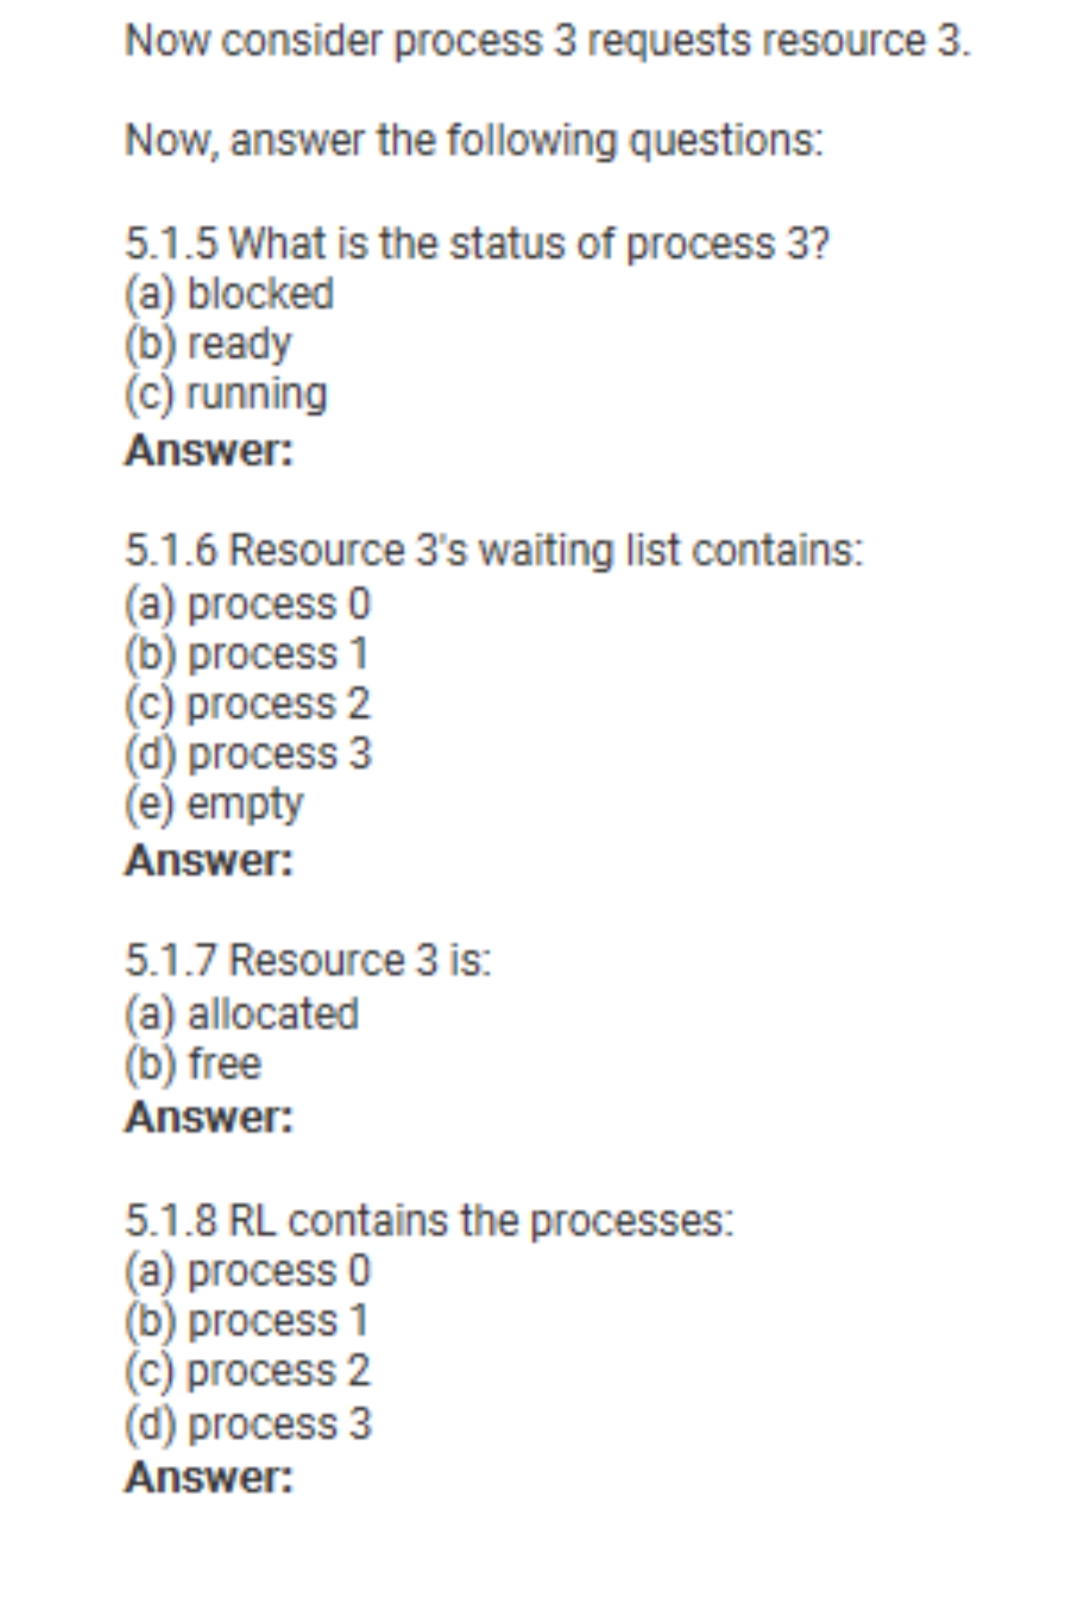 Now consider process 3 requests resource 3.
Now, answer the following questions:
5.1.5 What is the status of process 3?
(a) blocked
(b) ready
(c) running
Answer:
5.1.6 Resource 3's waiting list contains:
(a) process 0
(b) process 1
(c) process 2
d) process 3
(e) empty
Answer:
5.1.7 Resource 3 is:
(a) allocated
(b) free
Answer:
5.1.8 RL contains the processes:
(a) process 0
(b) process 1
(c) process 2
(d) process 3
Answer:
